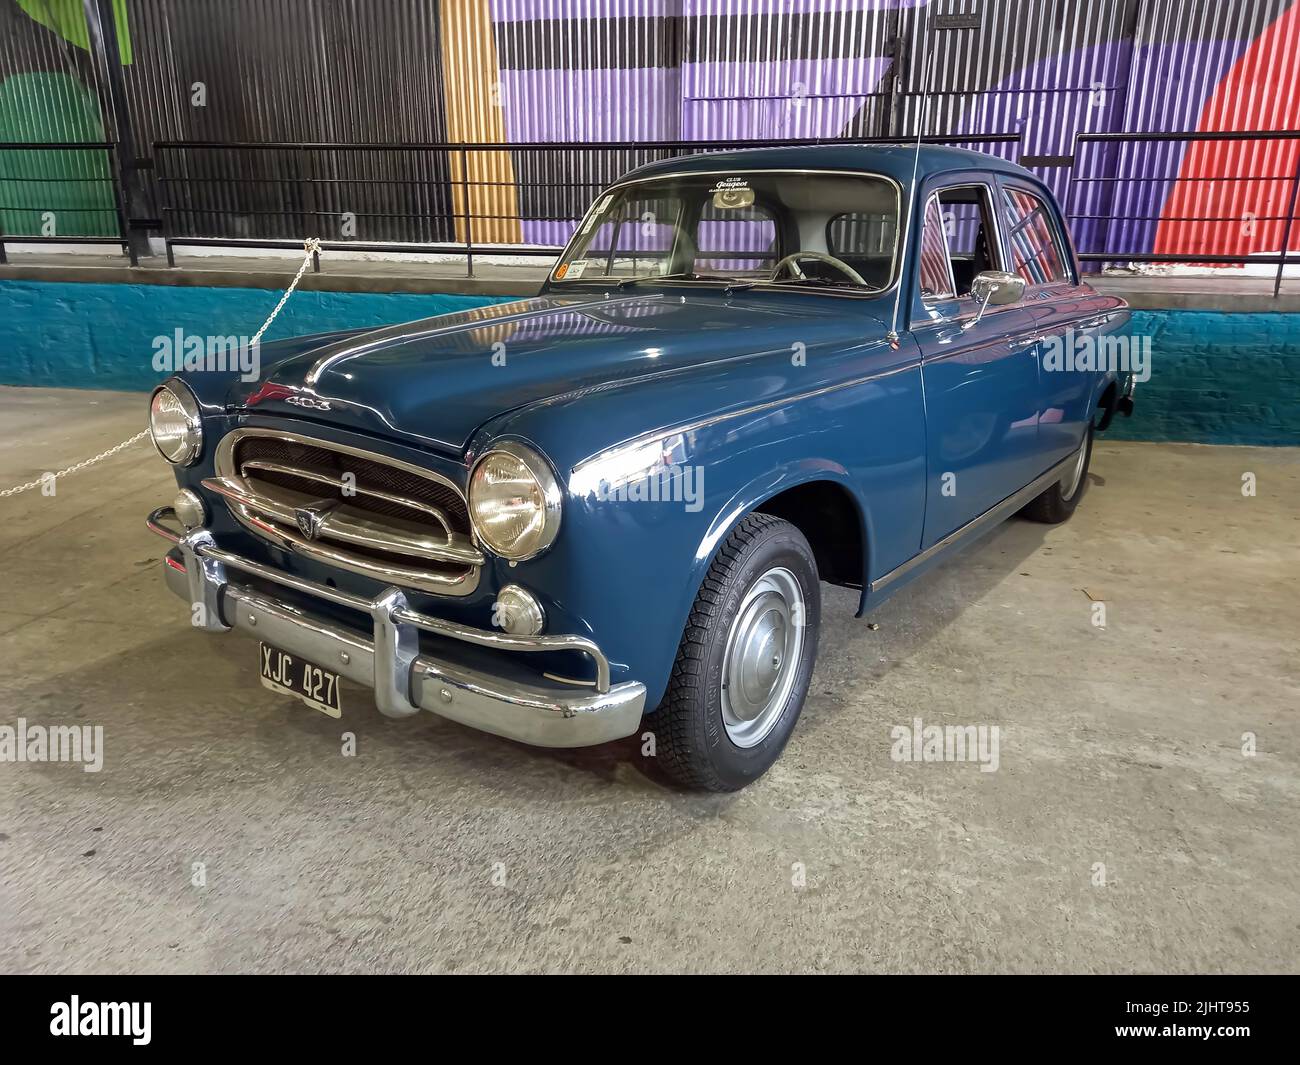 Avellaneda, Argentina - May 7, 2022: Old blue Peugeot 403 saloon, sedan, late 1950s in a warehouse yard. Expo Fierro 2022 classic car show Stock Photo